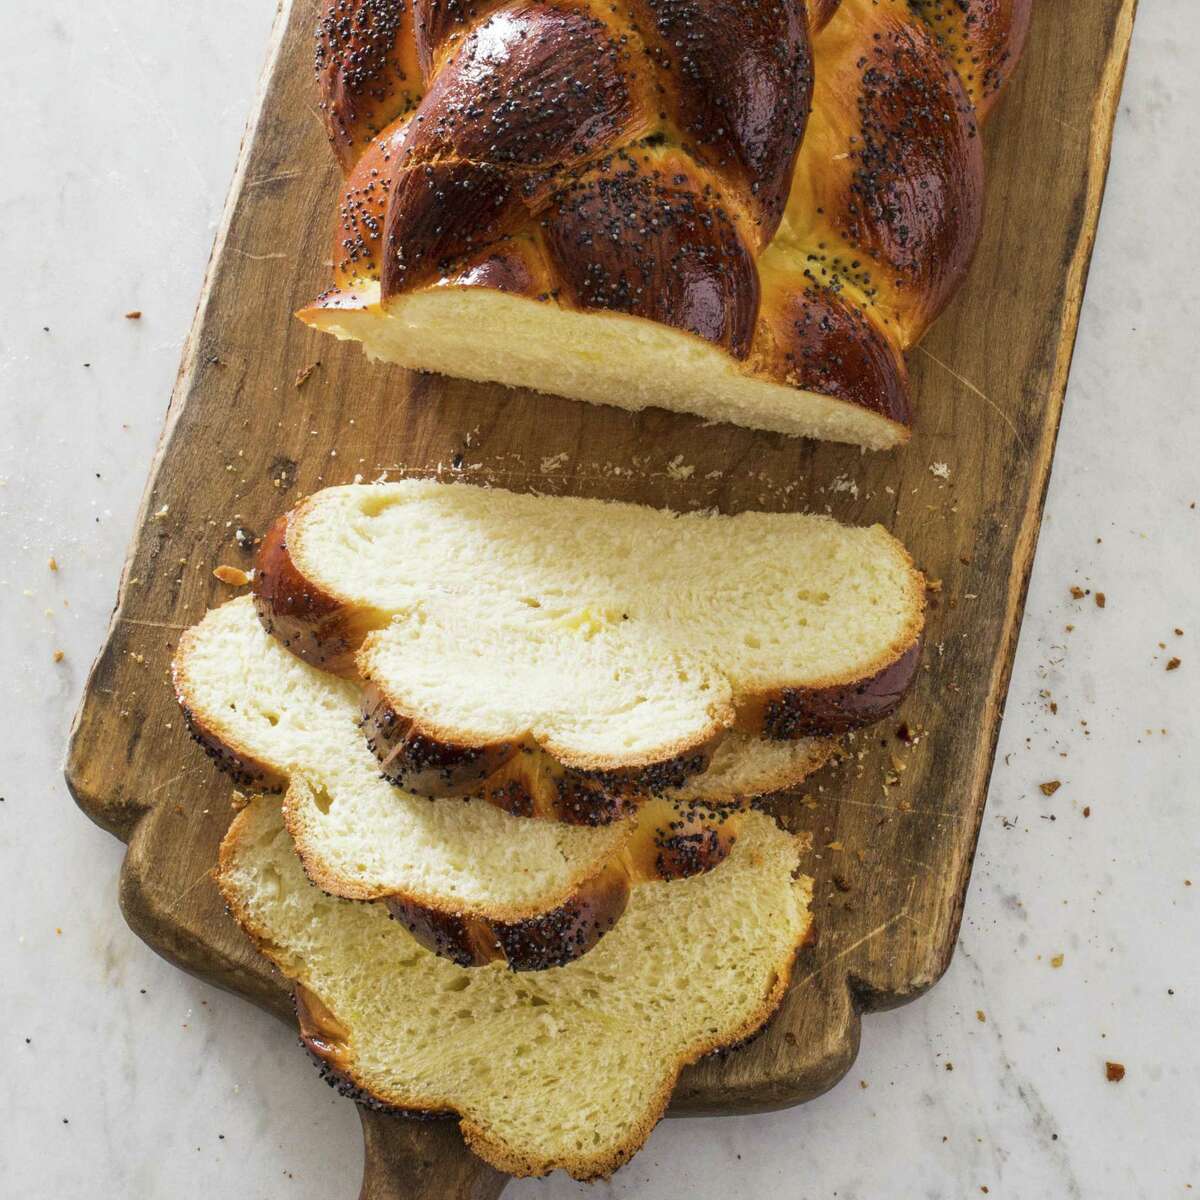 Challah bread has an important role through the Shabbat meal.